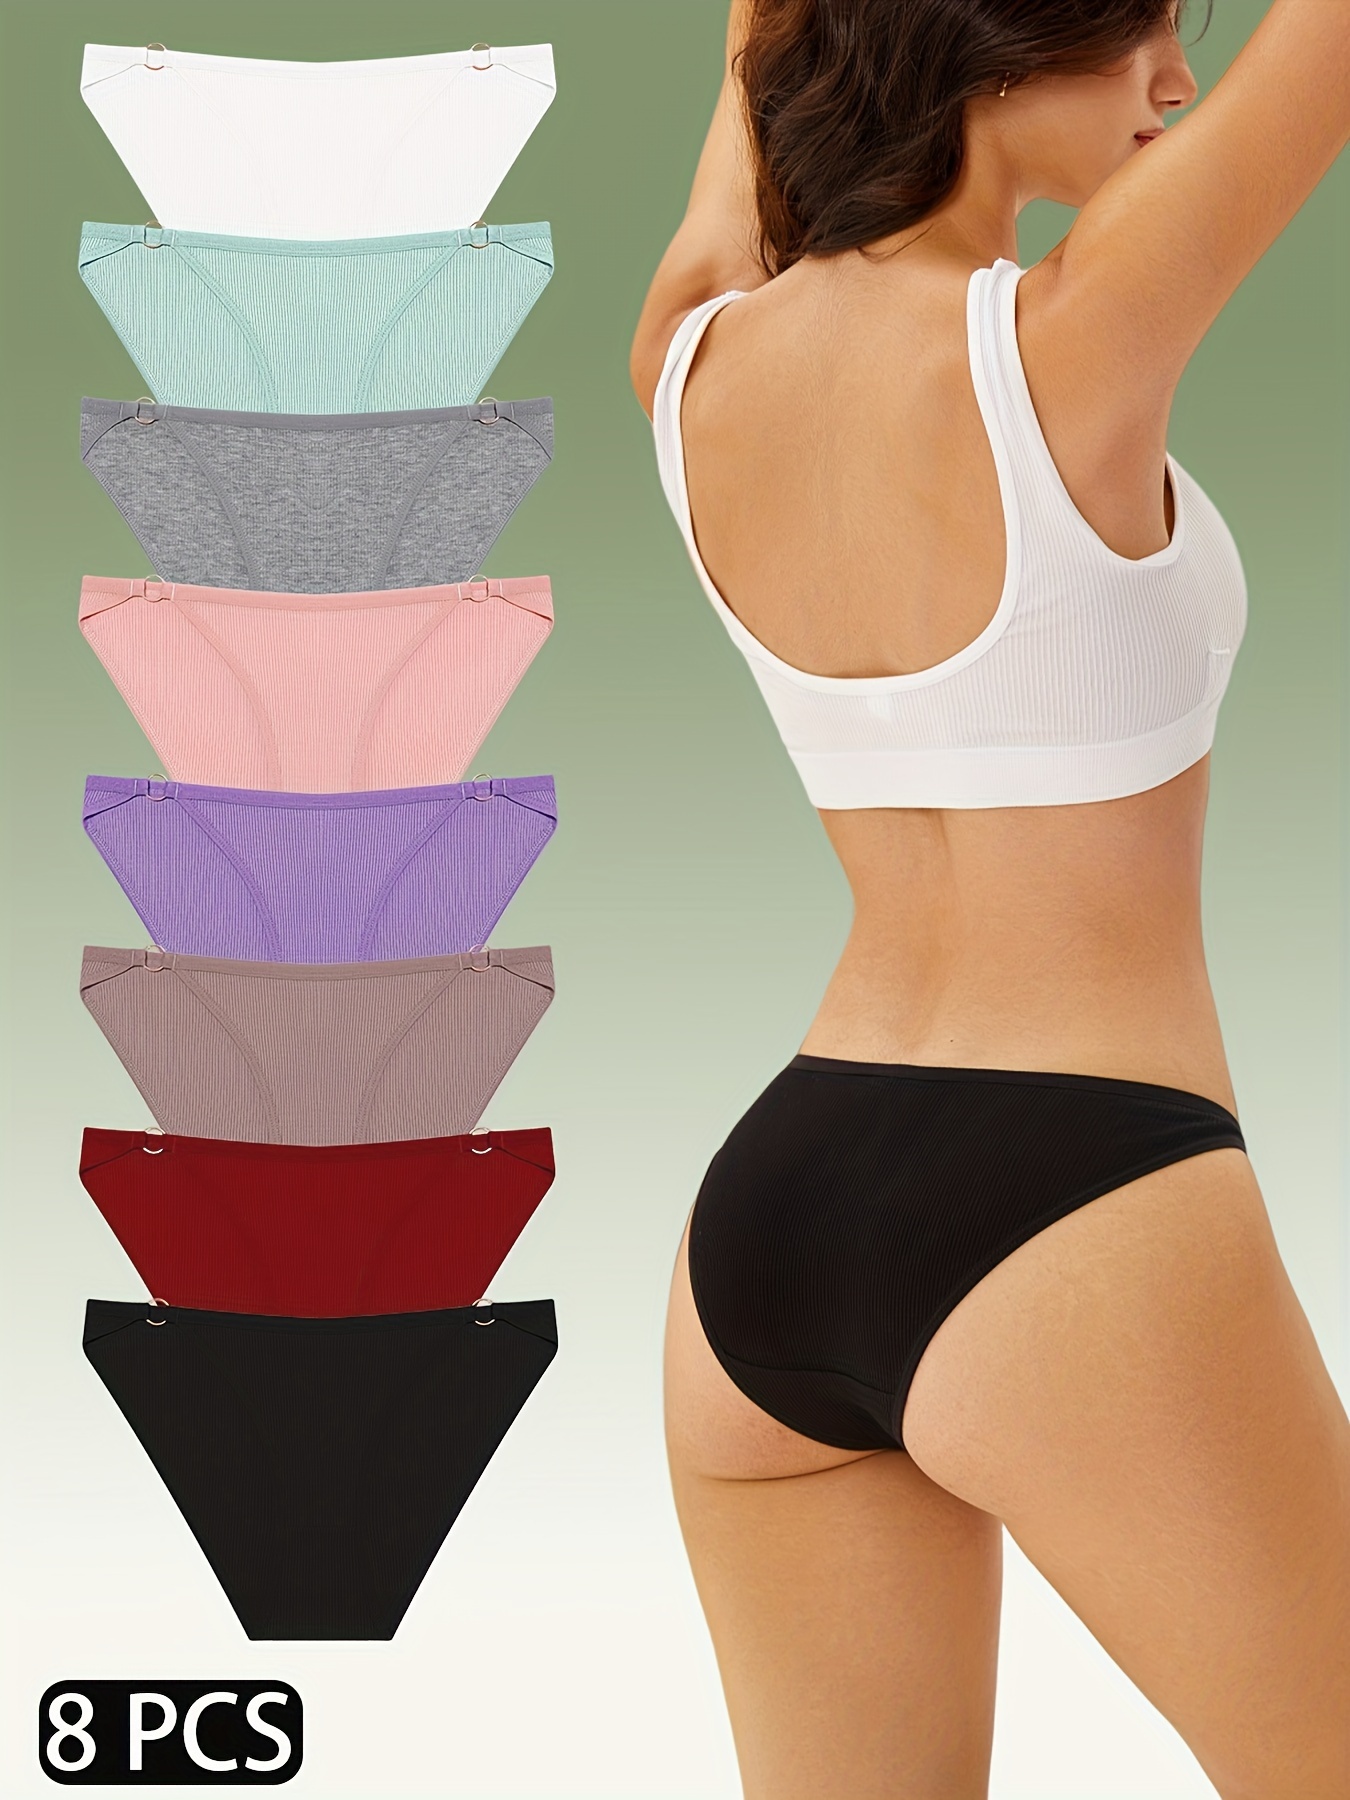 8pcs Ring Linked Briefs, Comfy & Breathable Stretchy Intimates Panties,  Women's Lingerie & Underwear